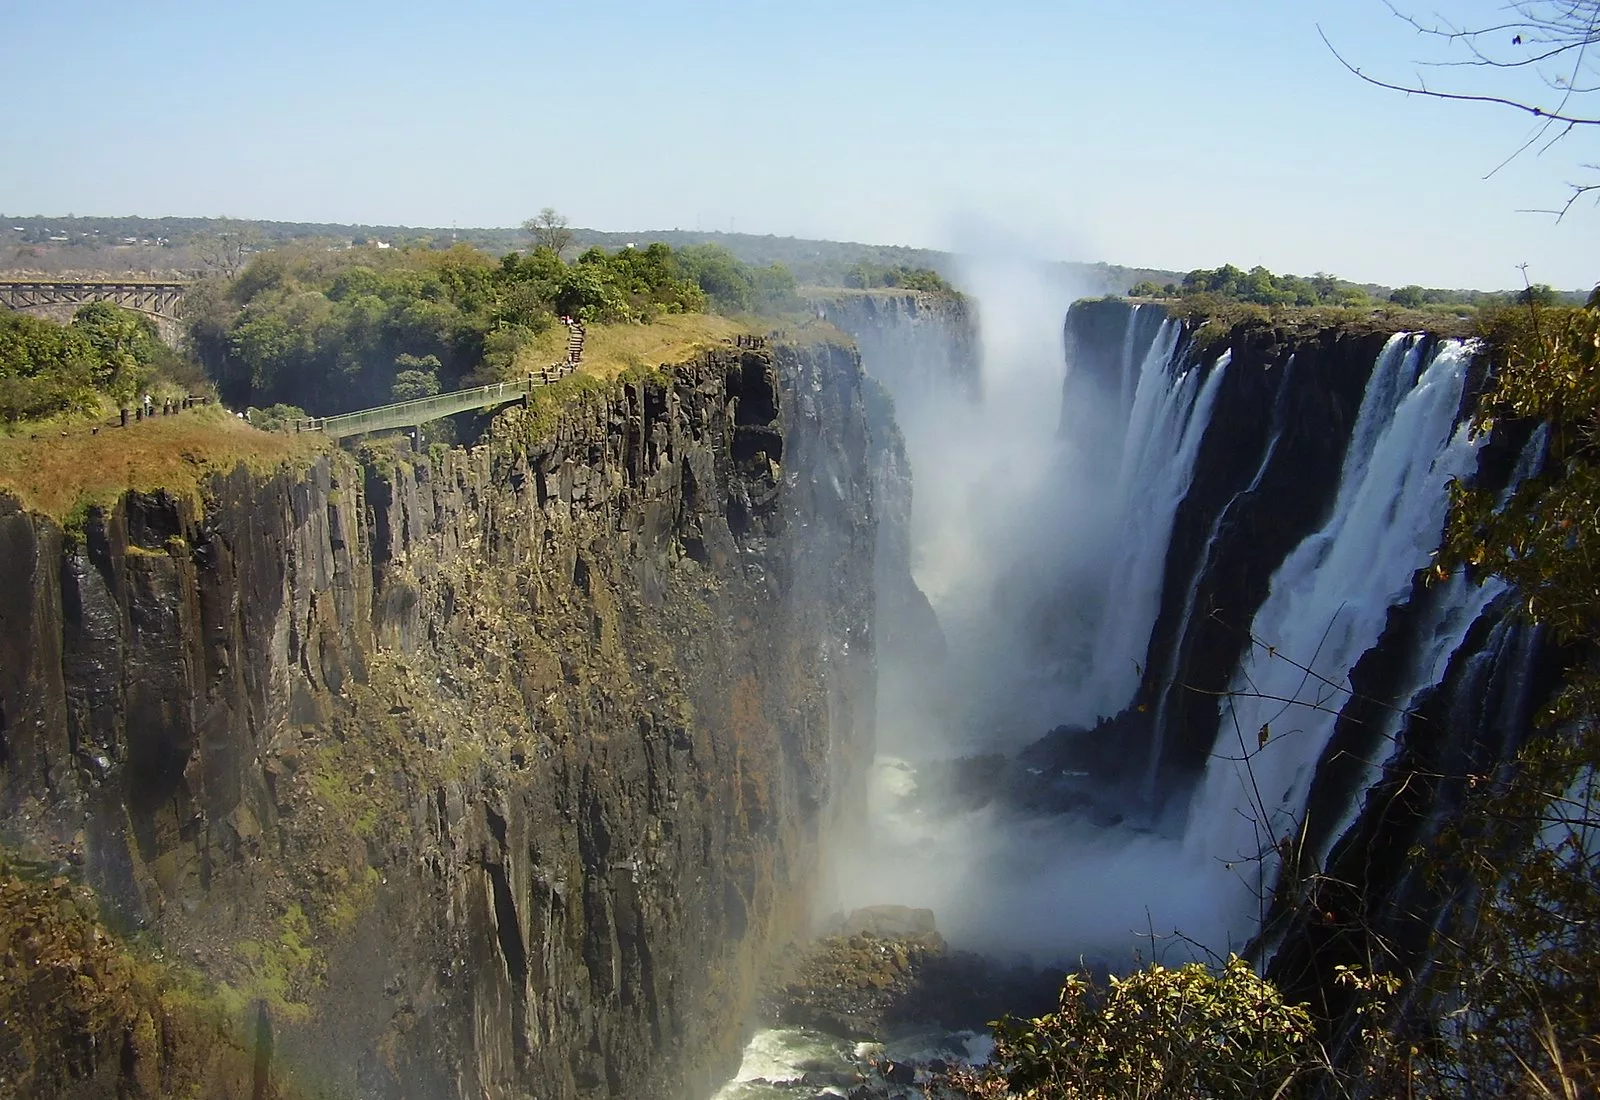 Zimbabwe’s Tourism Sector Revives with Increased Investor Interest and Infrastructure Upgrades